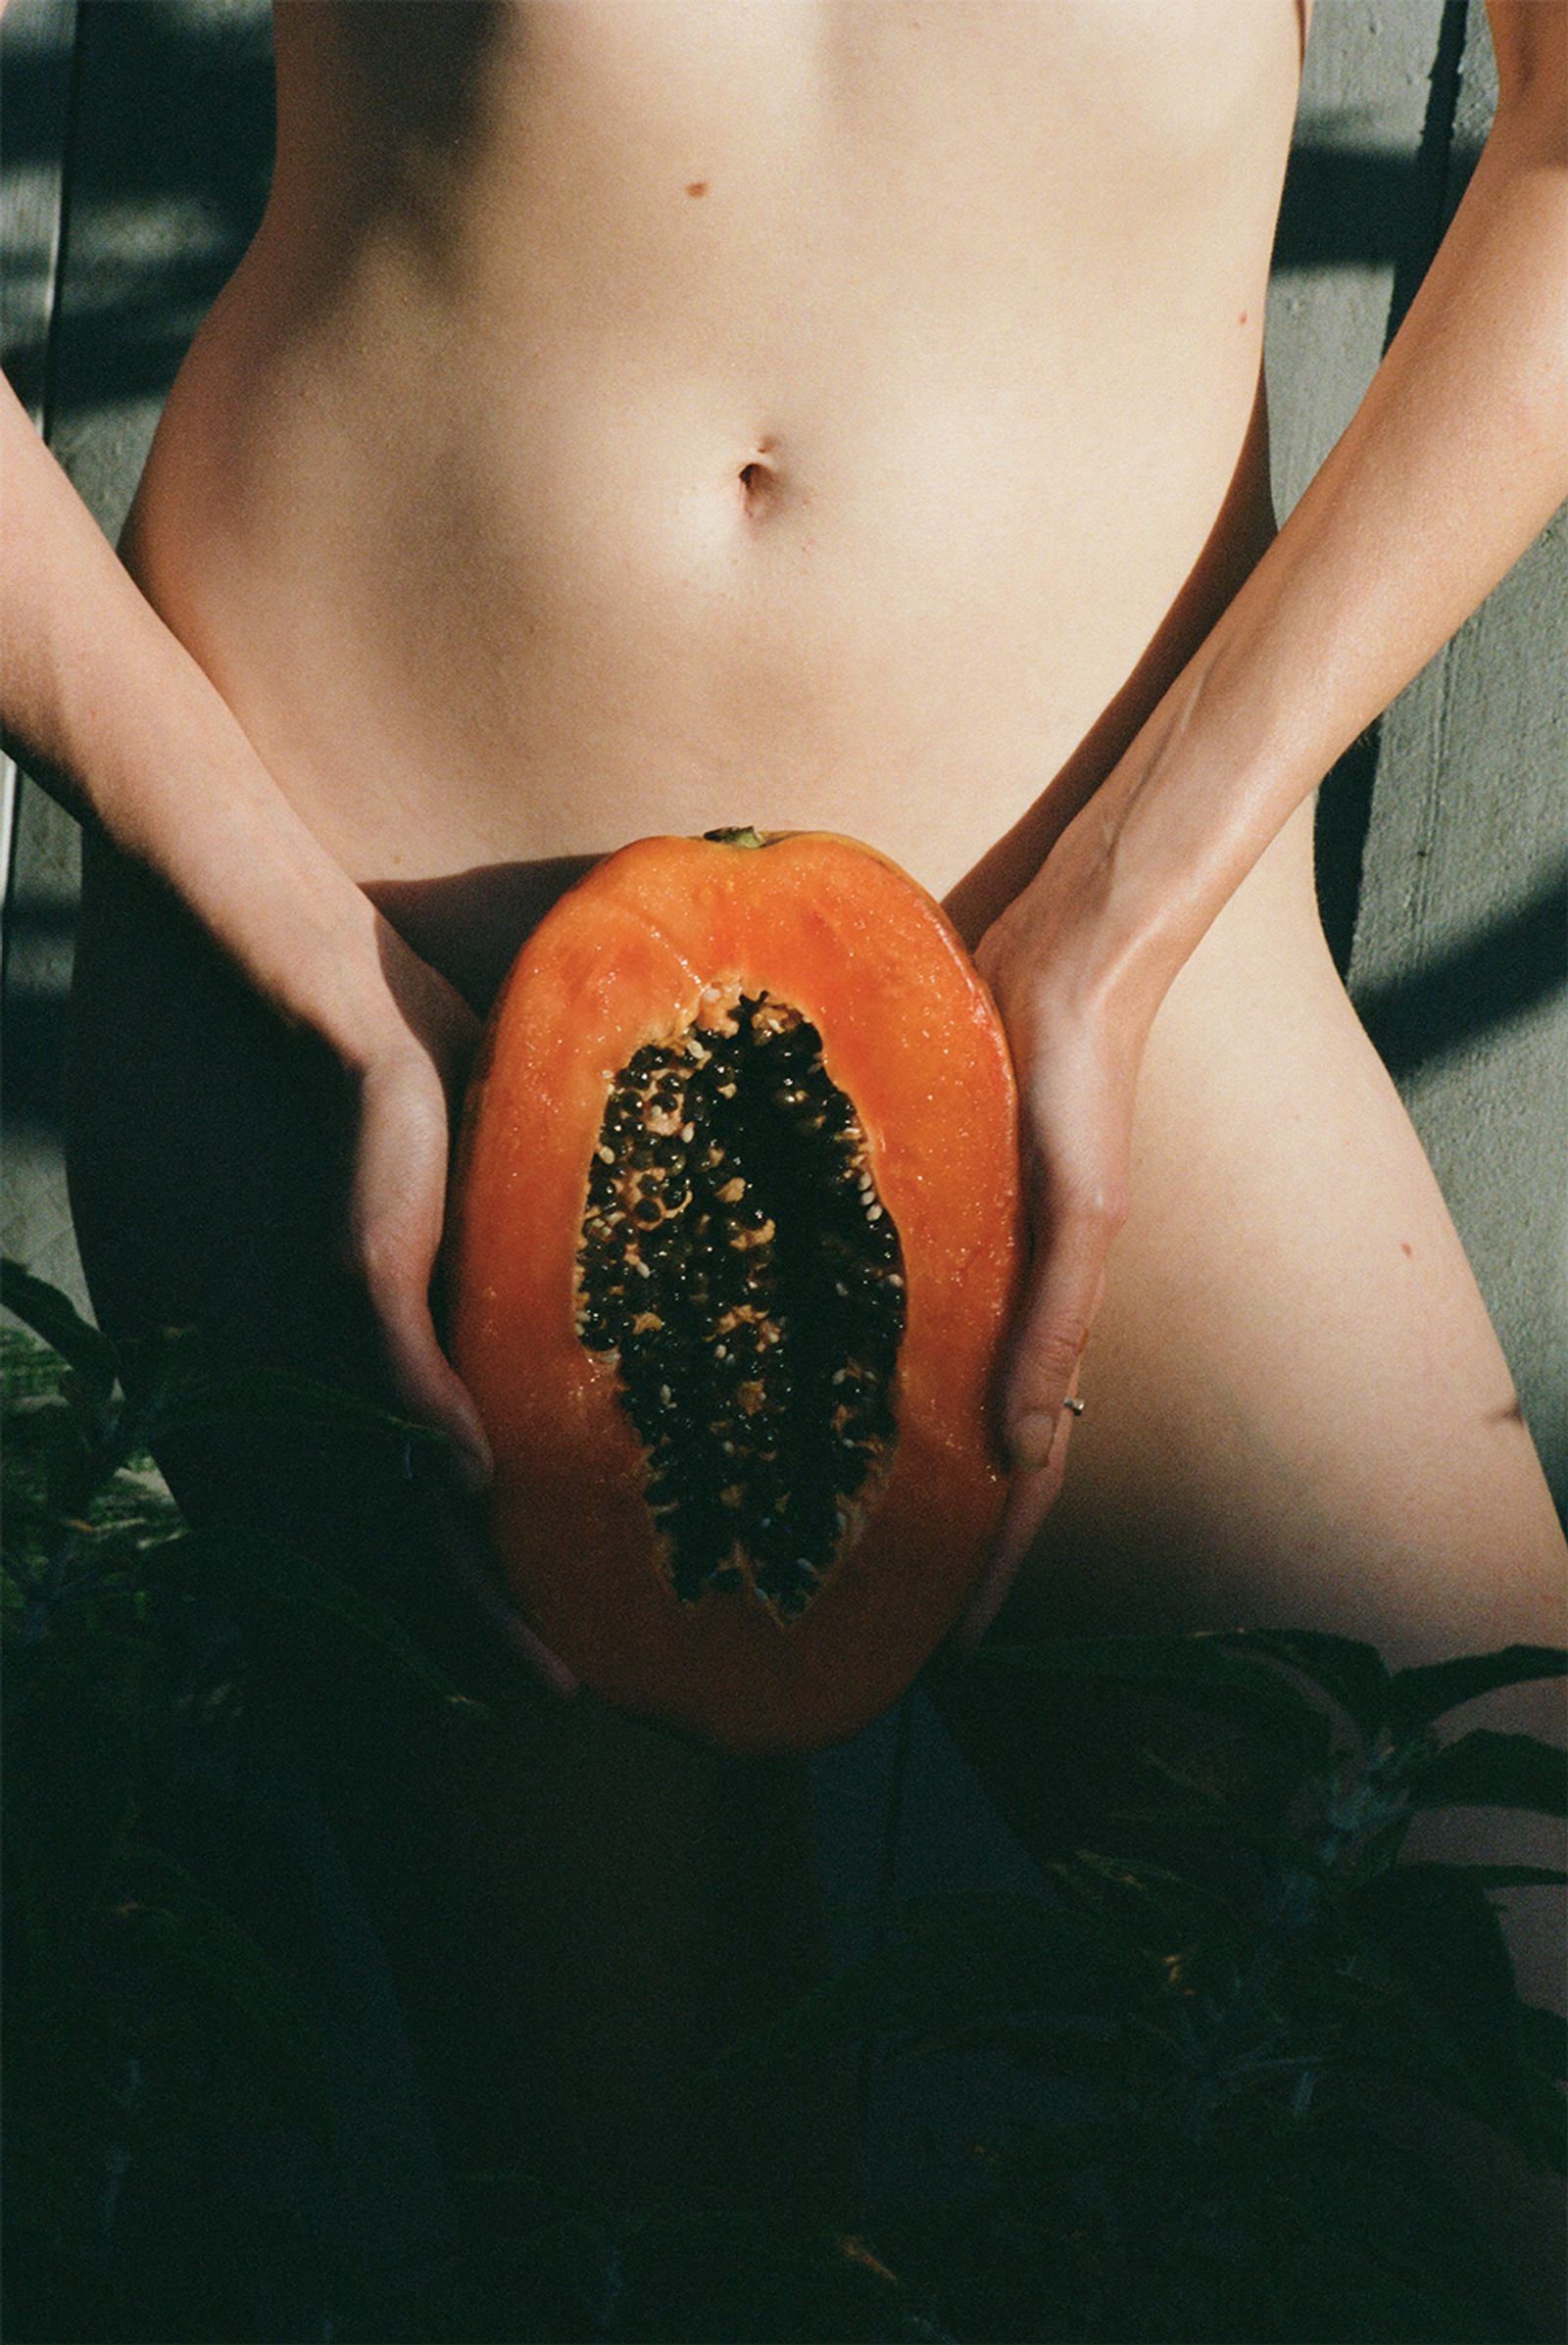 © Madeleine Morlet - Image from the The Body Is Not A Thing photography project